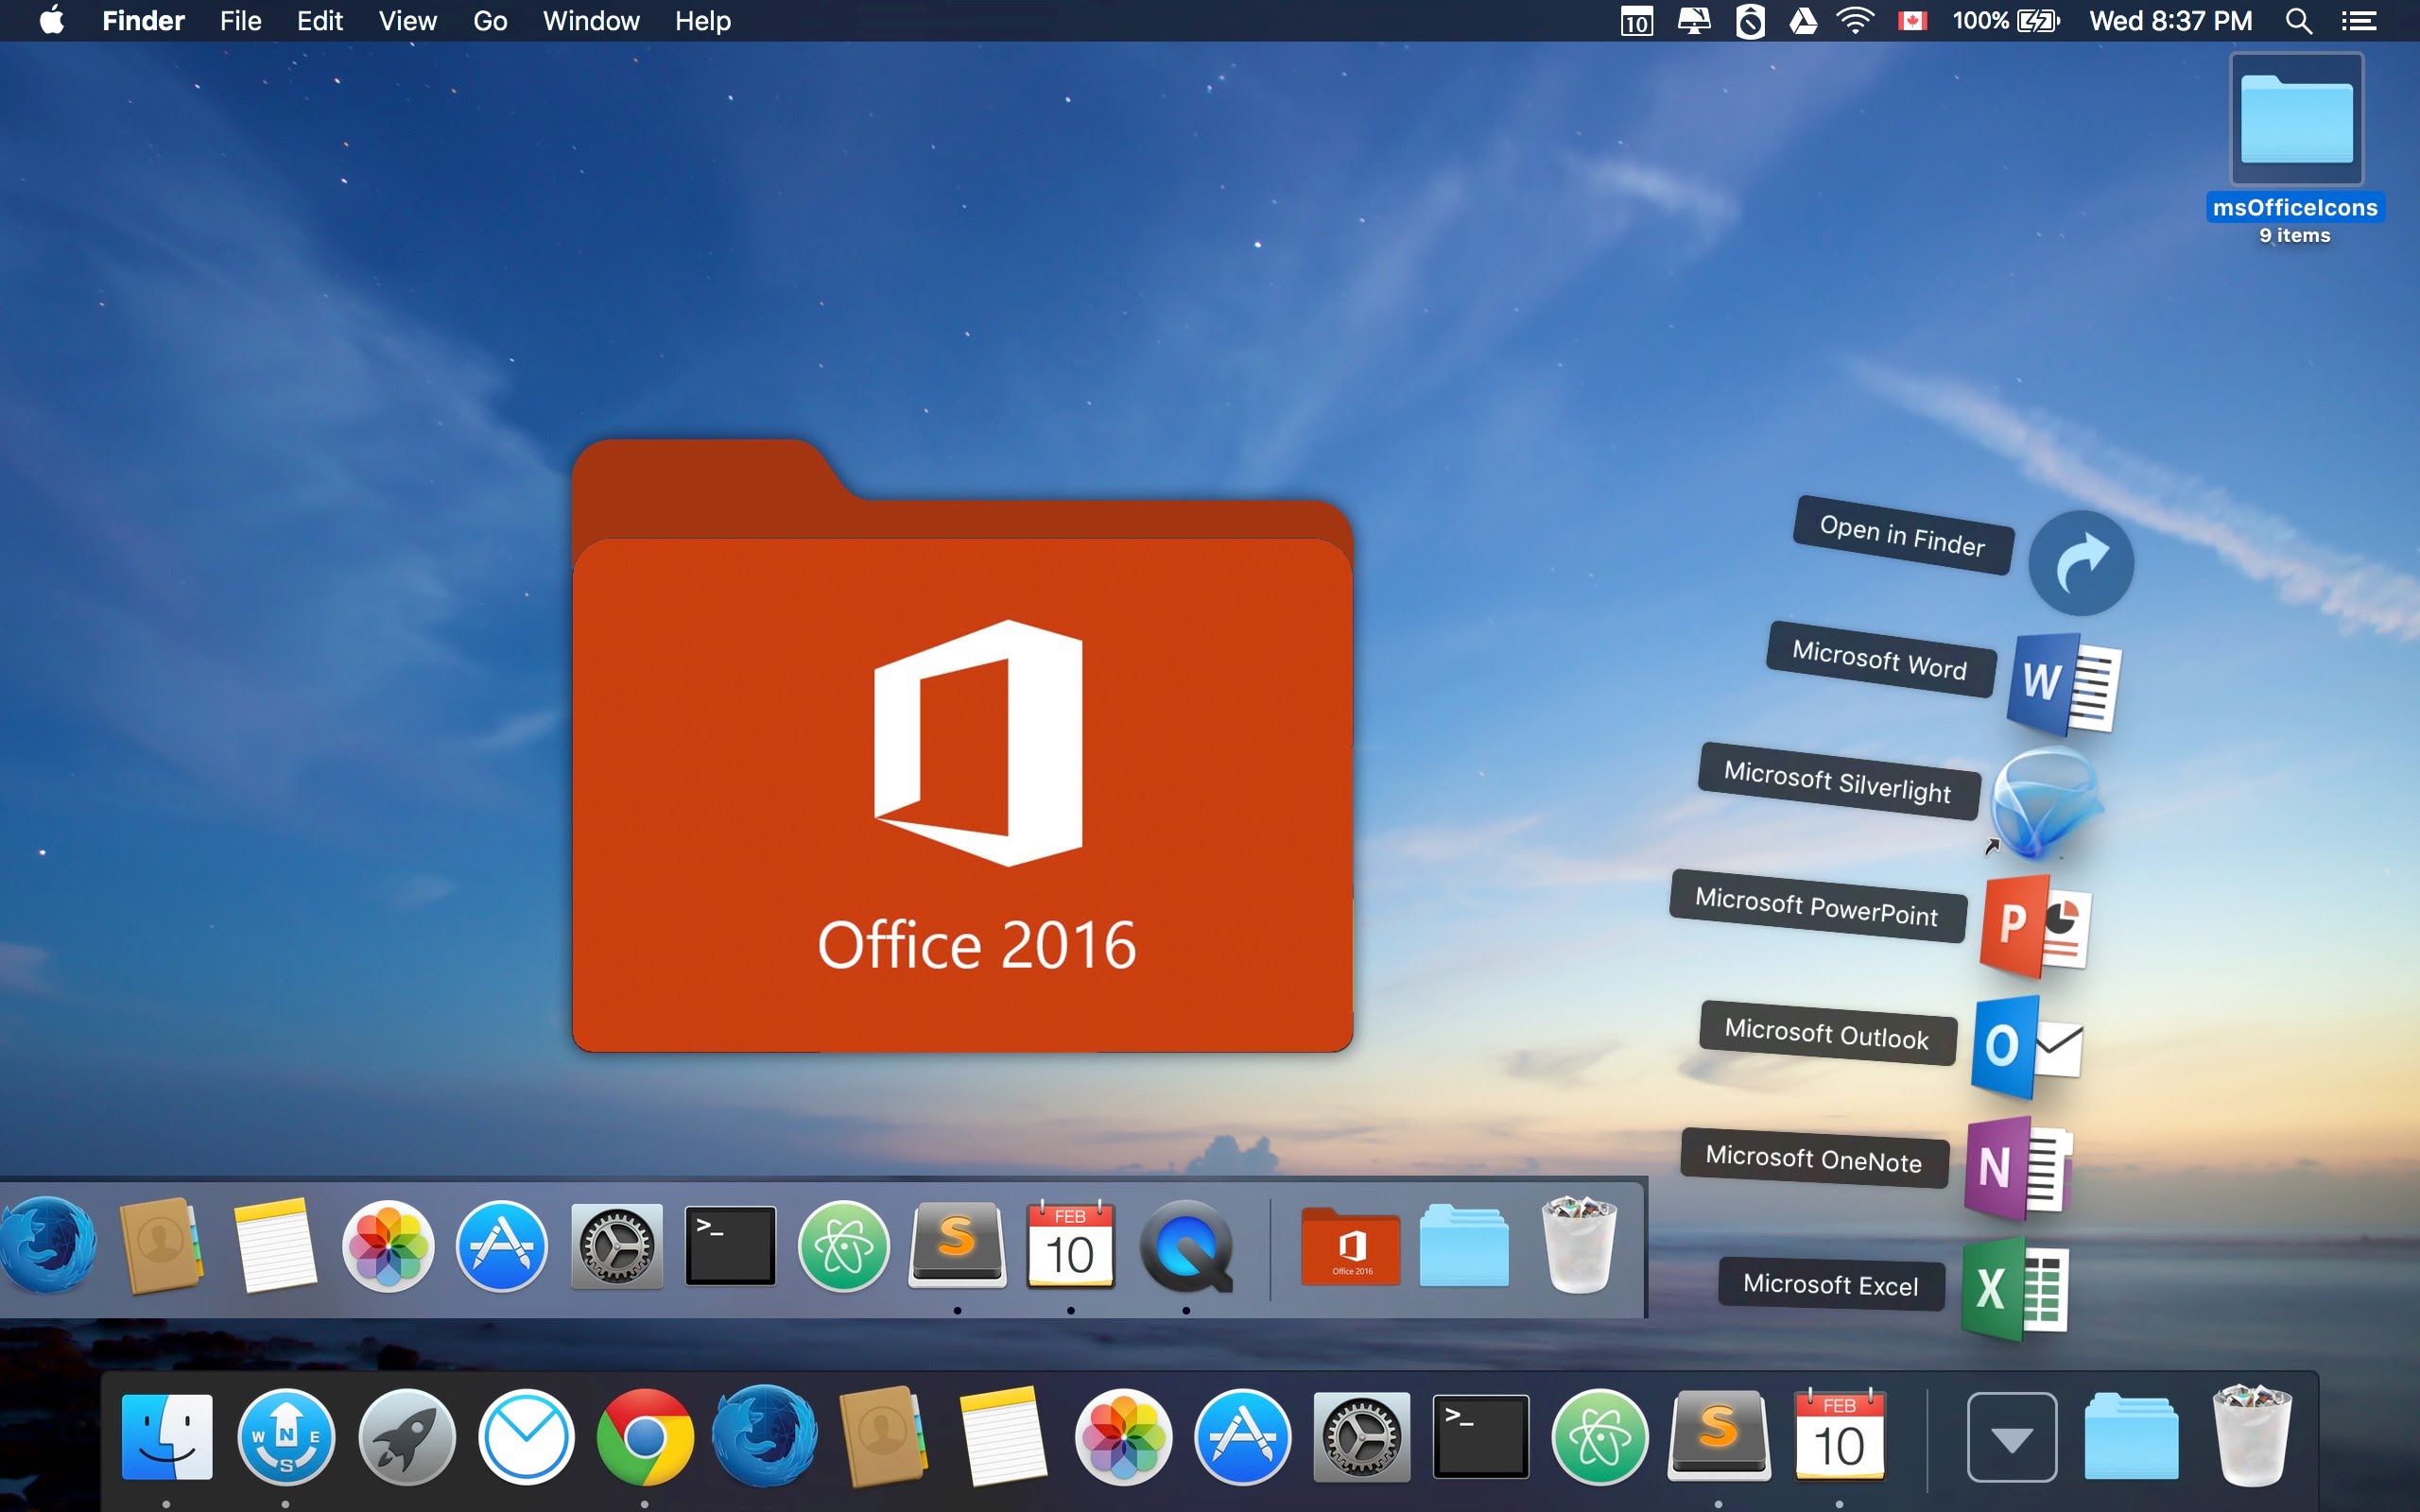 install office 2016 preview on windows 10